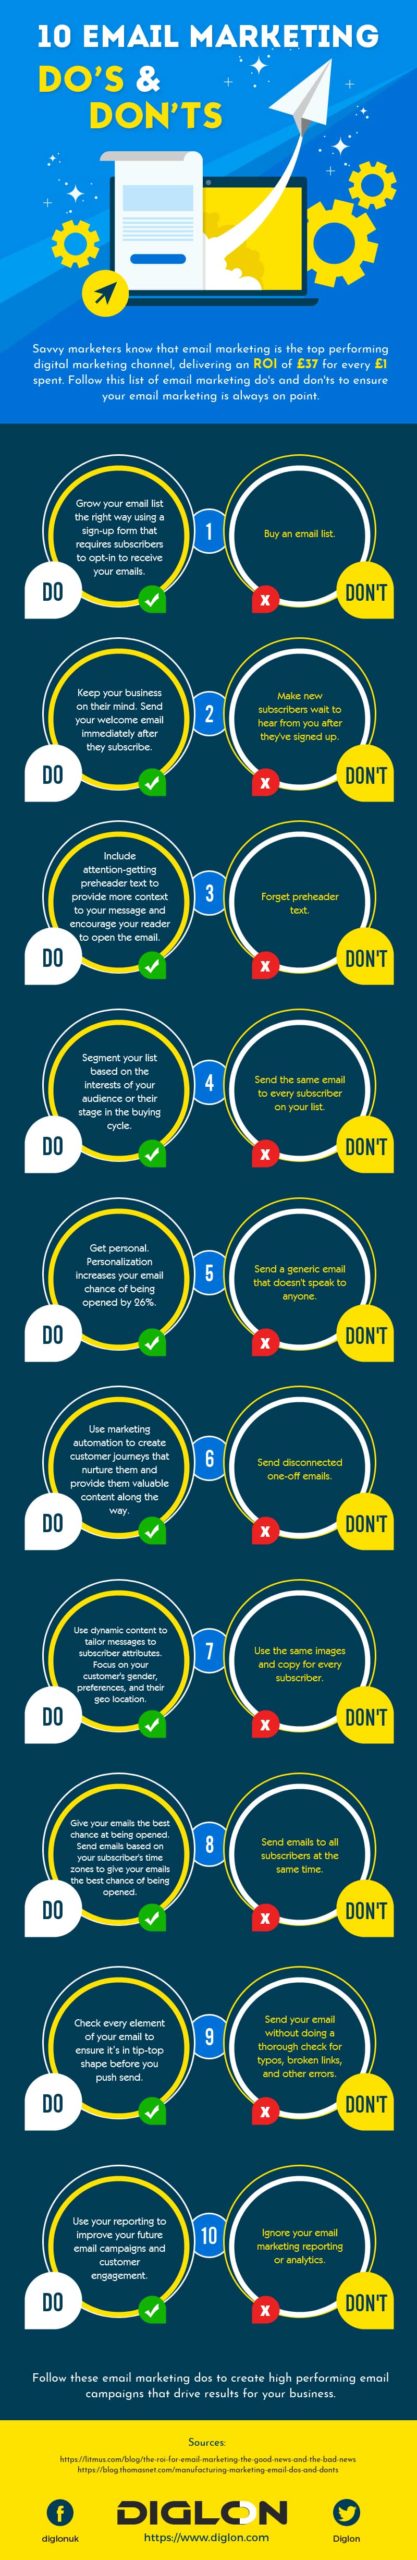 Ten Email Marketing Infographic